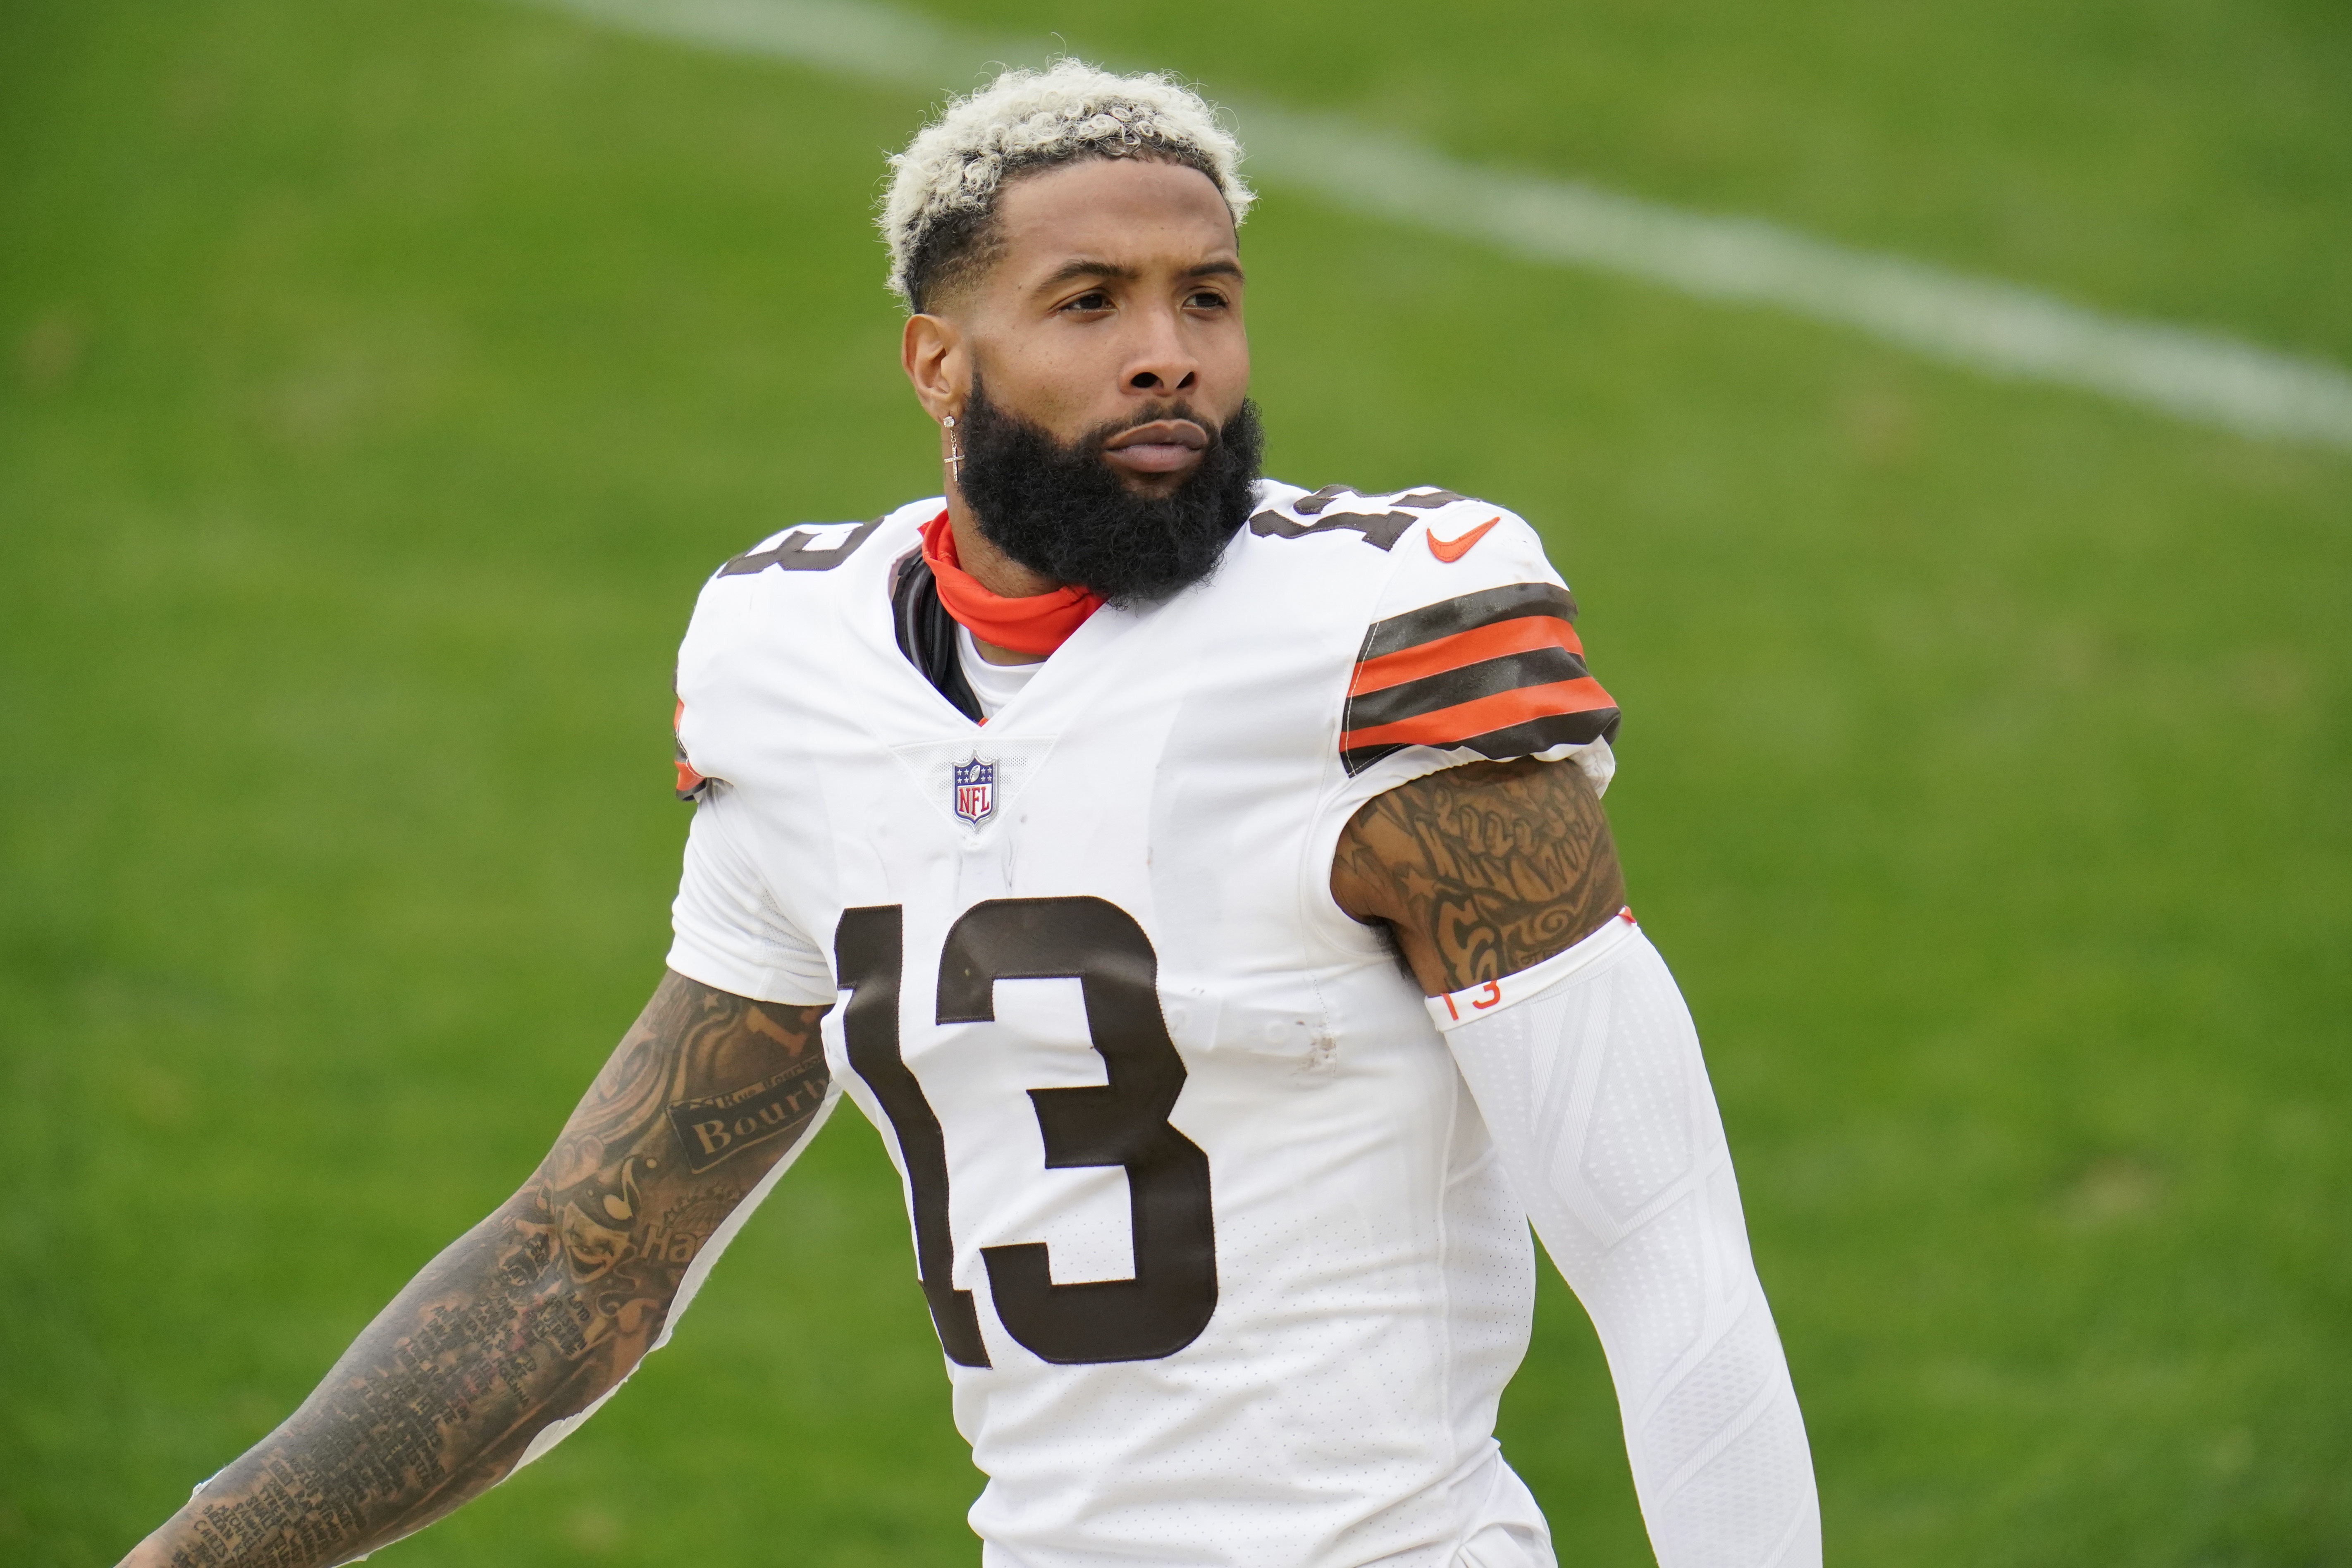 Odell Beckham Jr.'s knee injury may be torn ACL: report